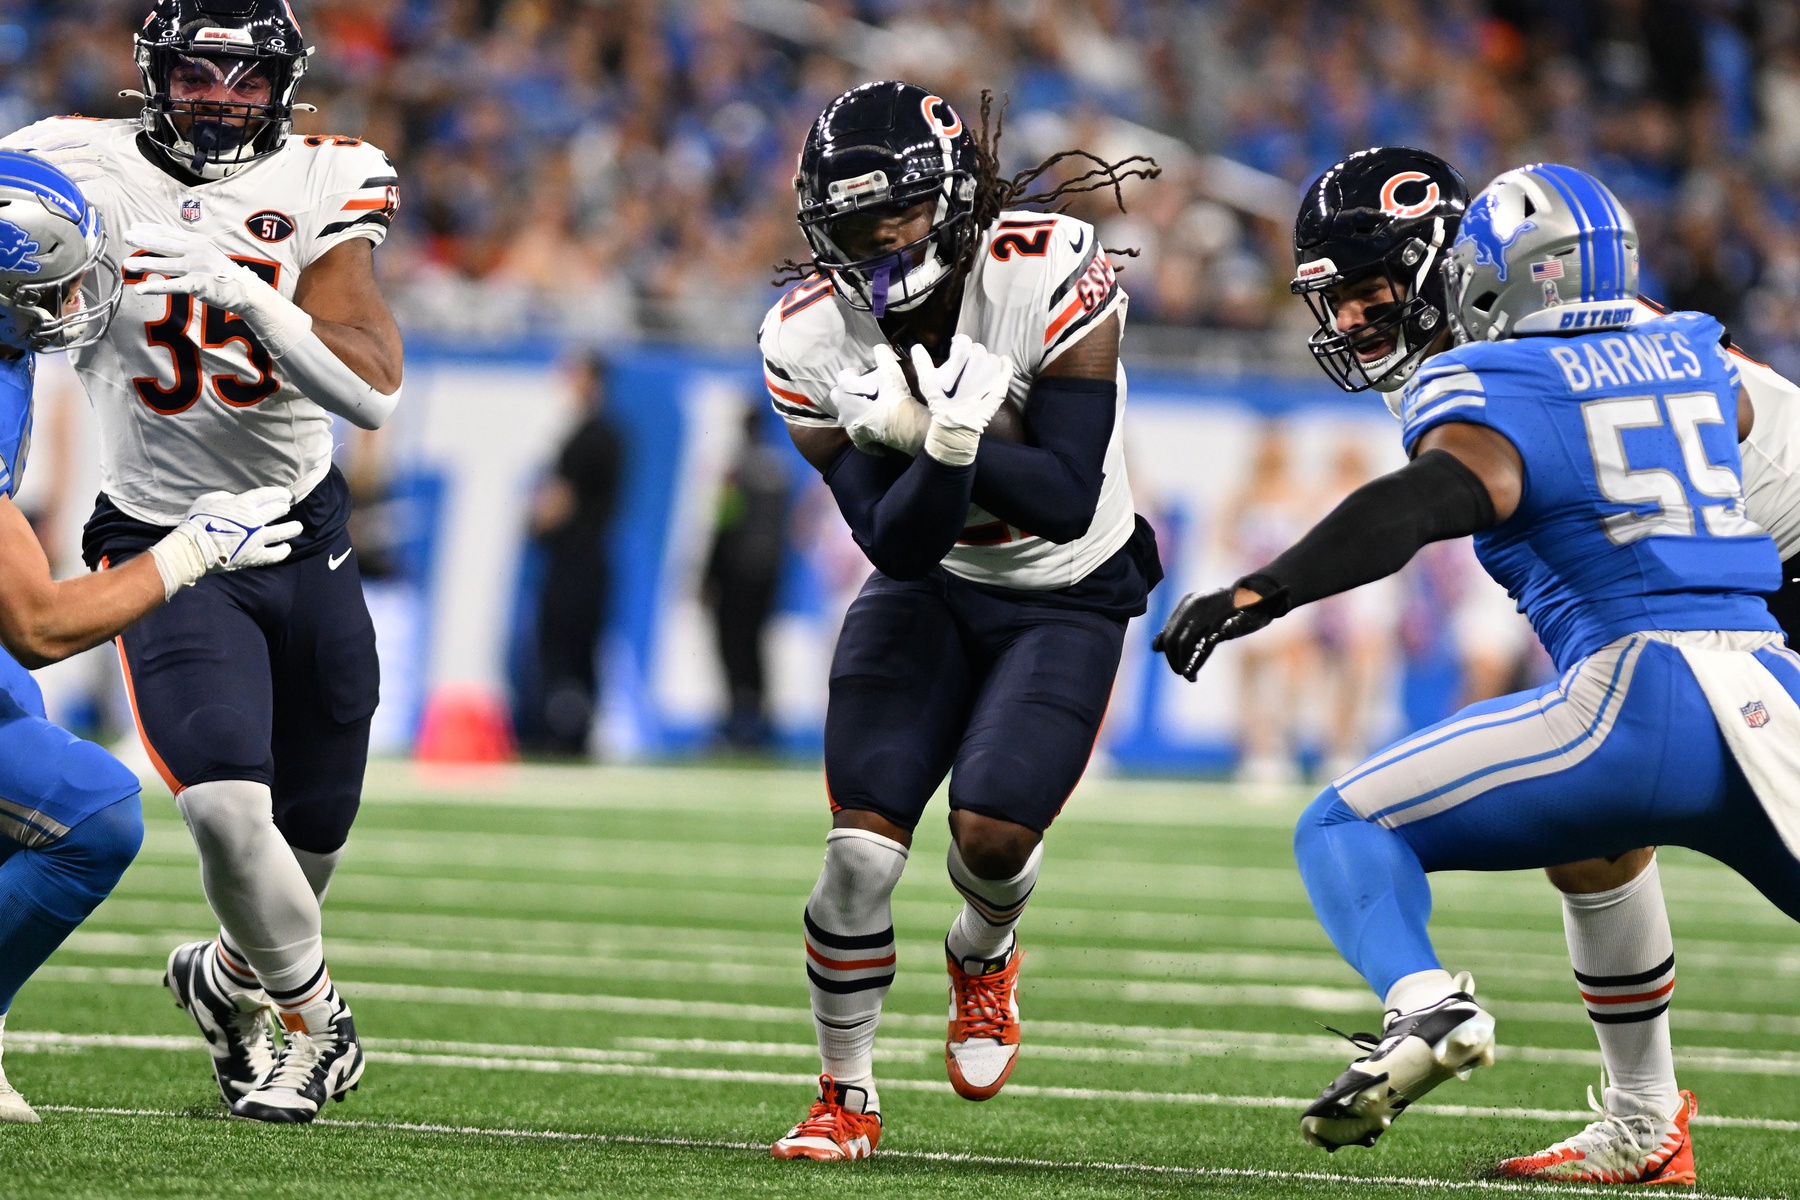 Chicago Bears RB D'Onta Foreman (21) runs the ball against the Detroit Lions.